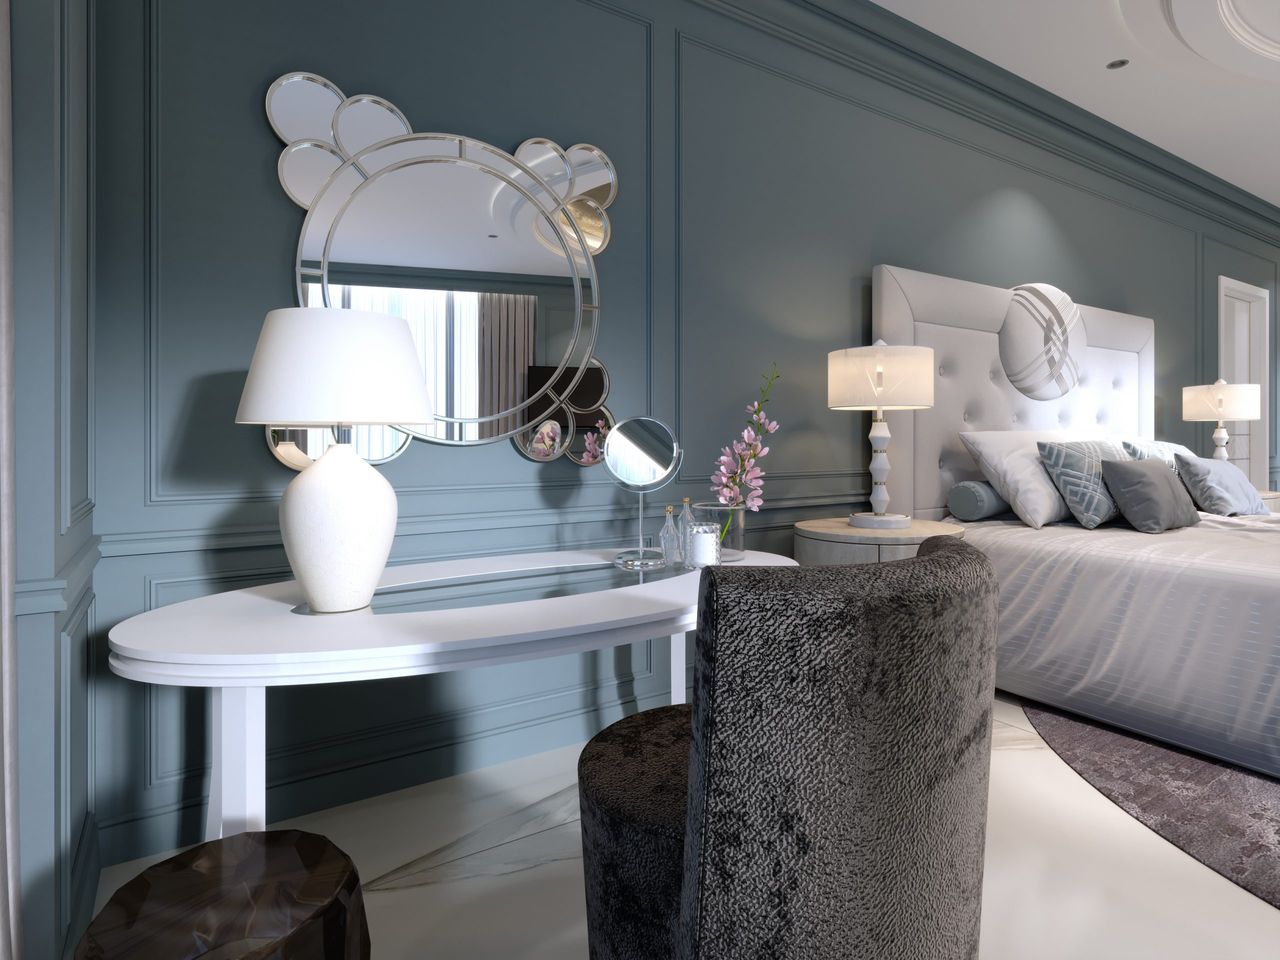 Classic white dressing table with a round mirror and soft chair in the bedroom. 3d rendering